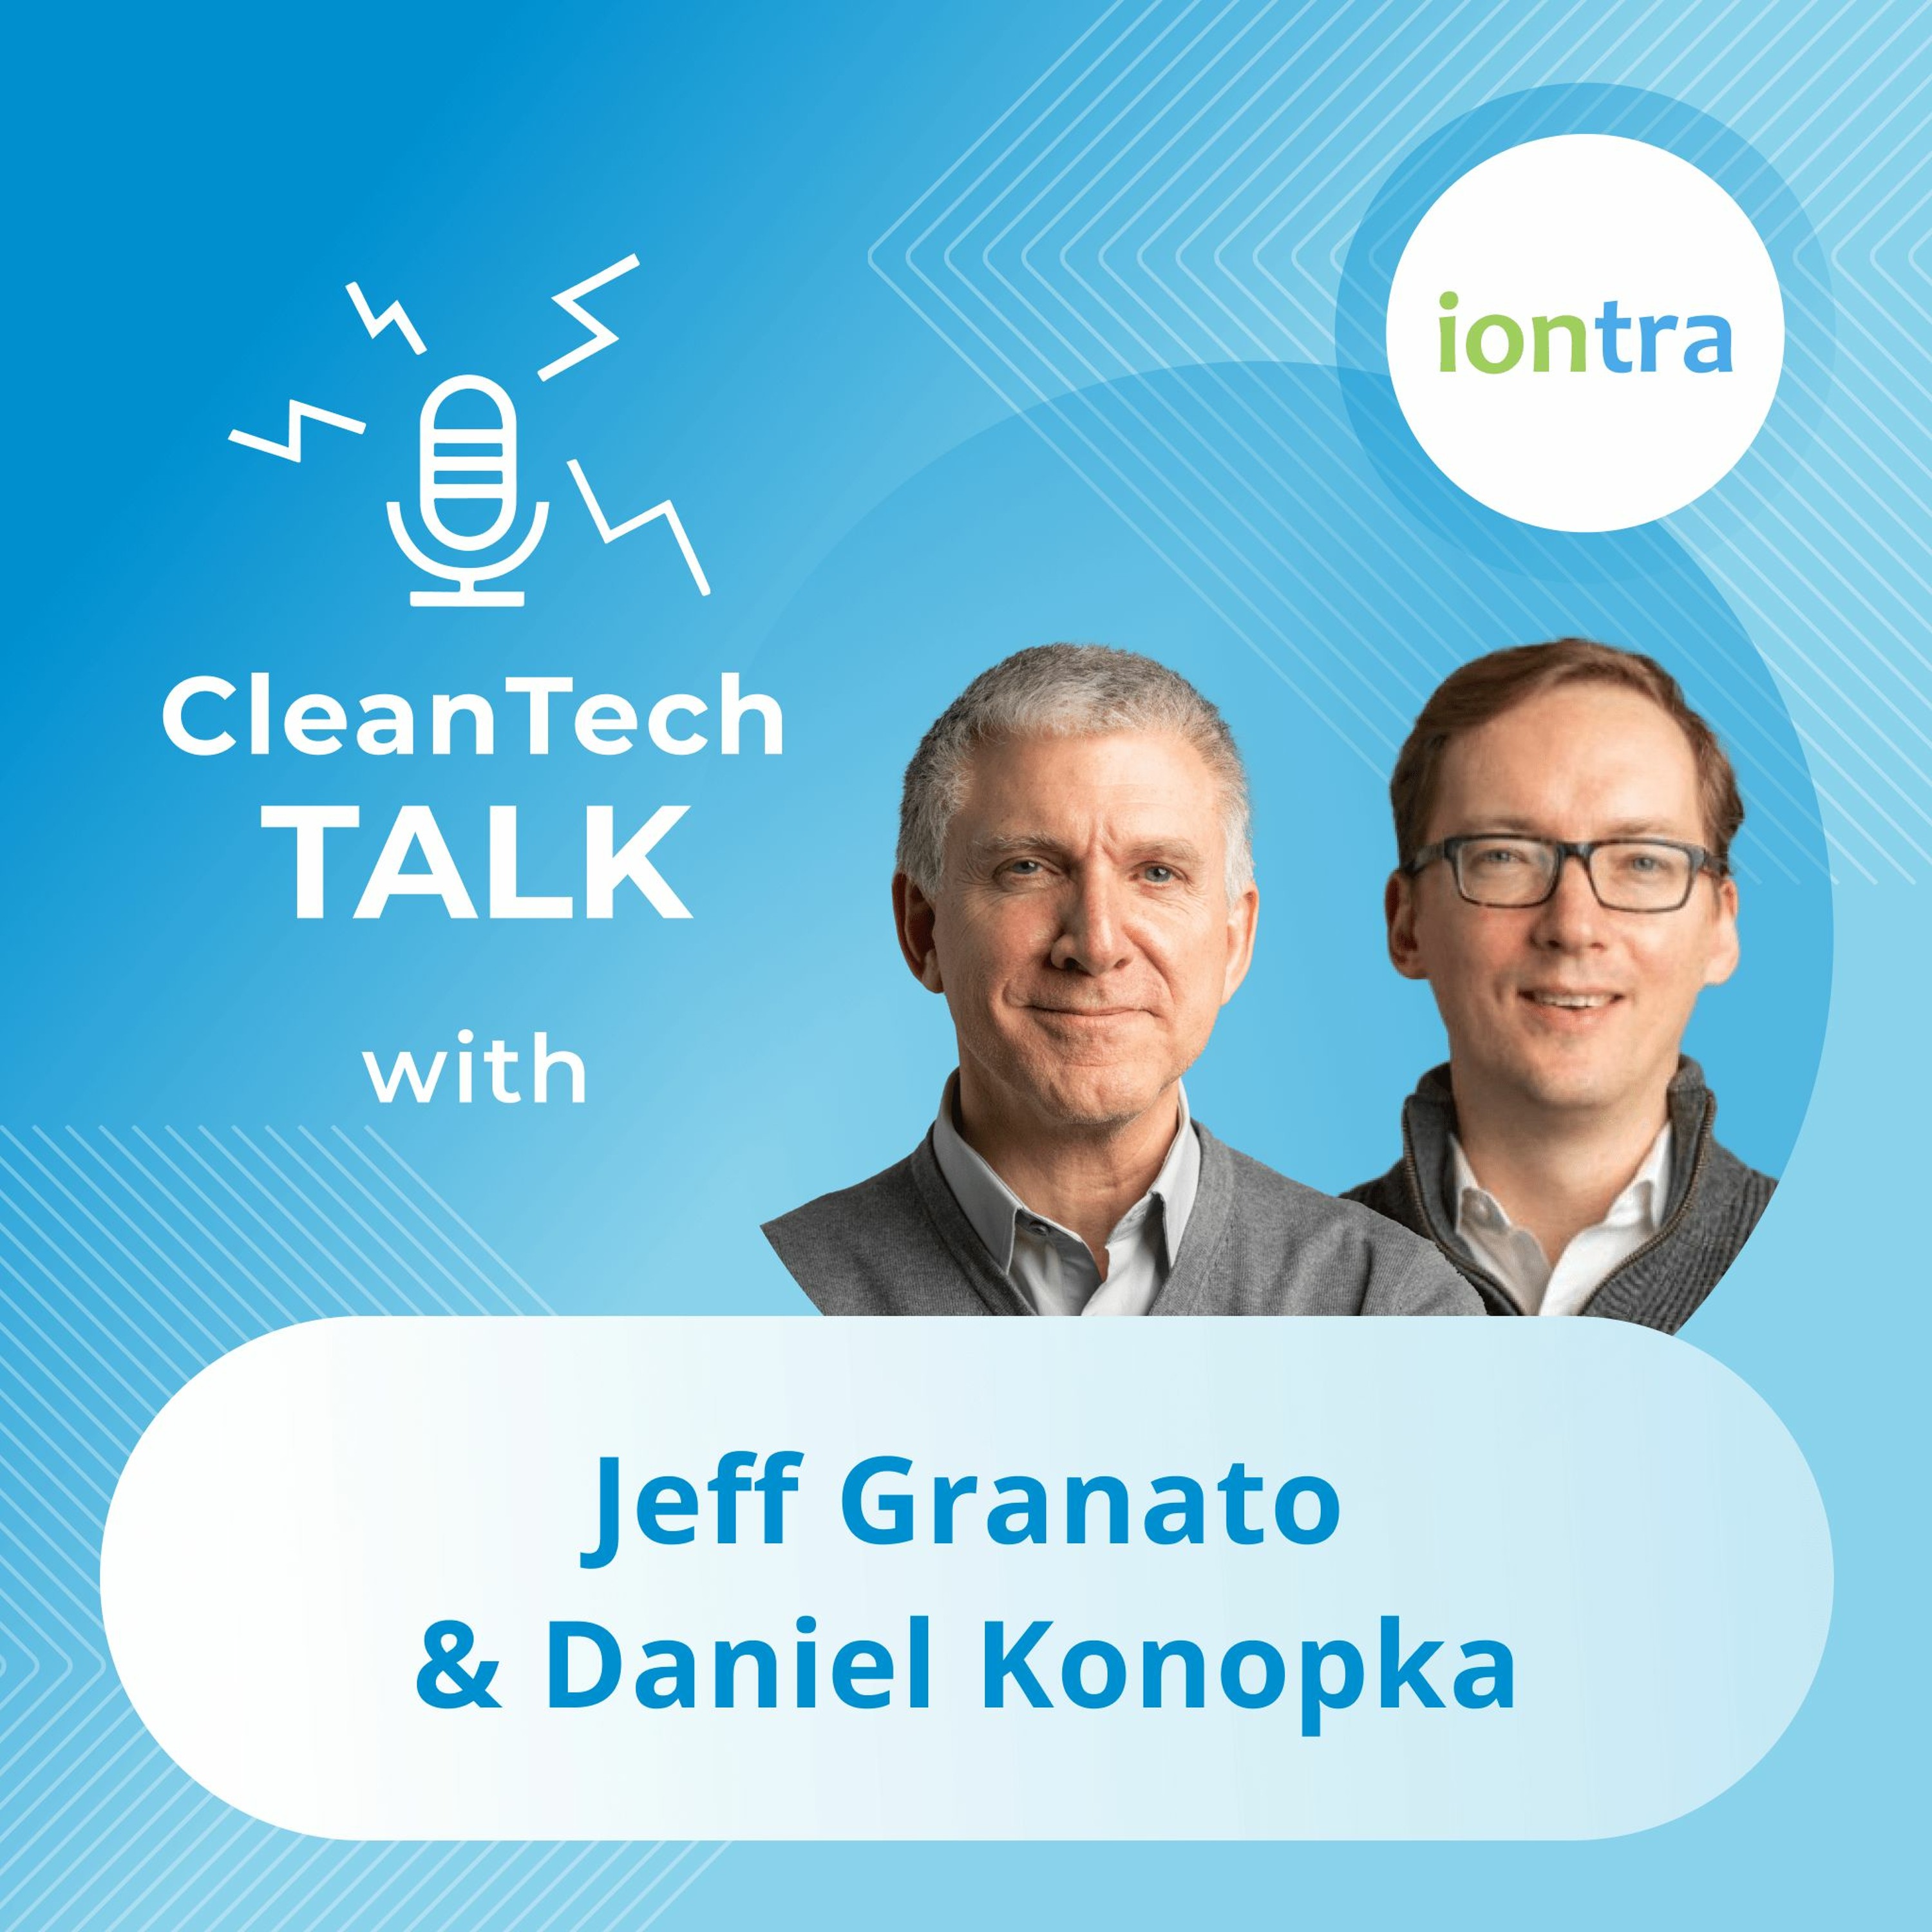 Iontra Inc: ”Thinking Outside the Battery” to Dramatically Improve Performance